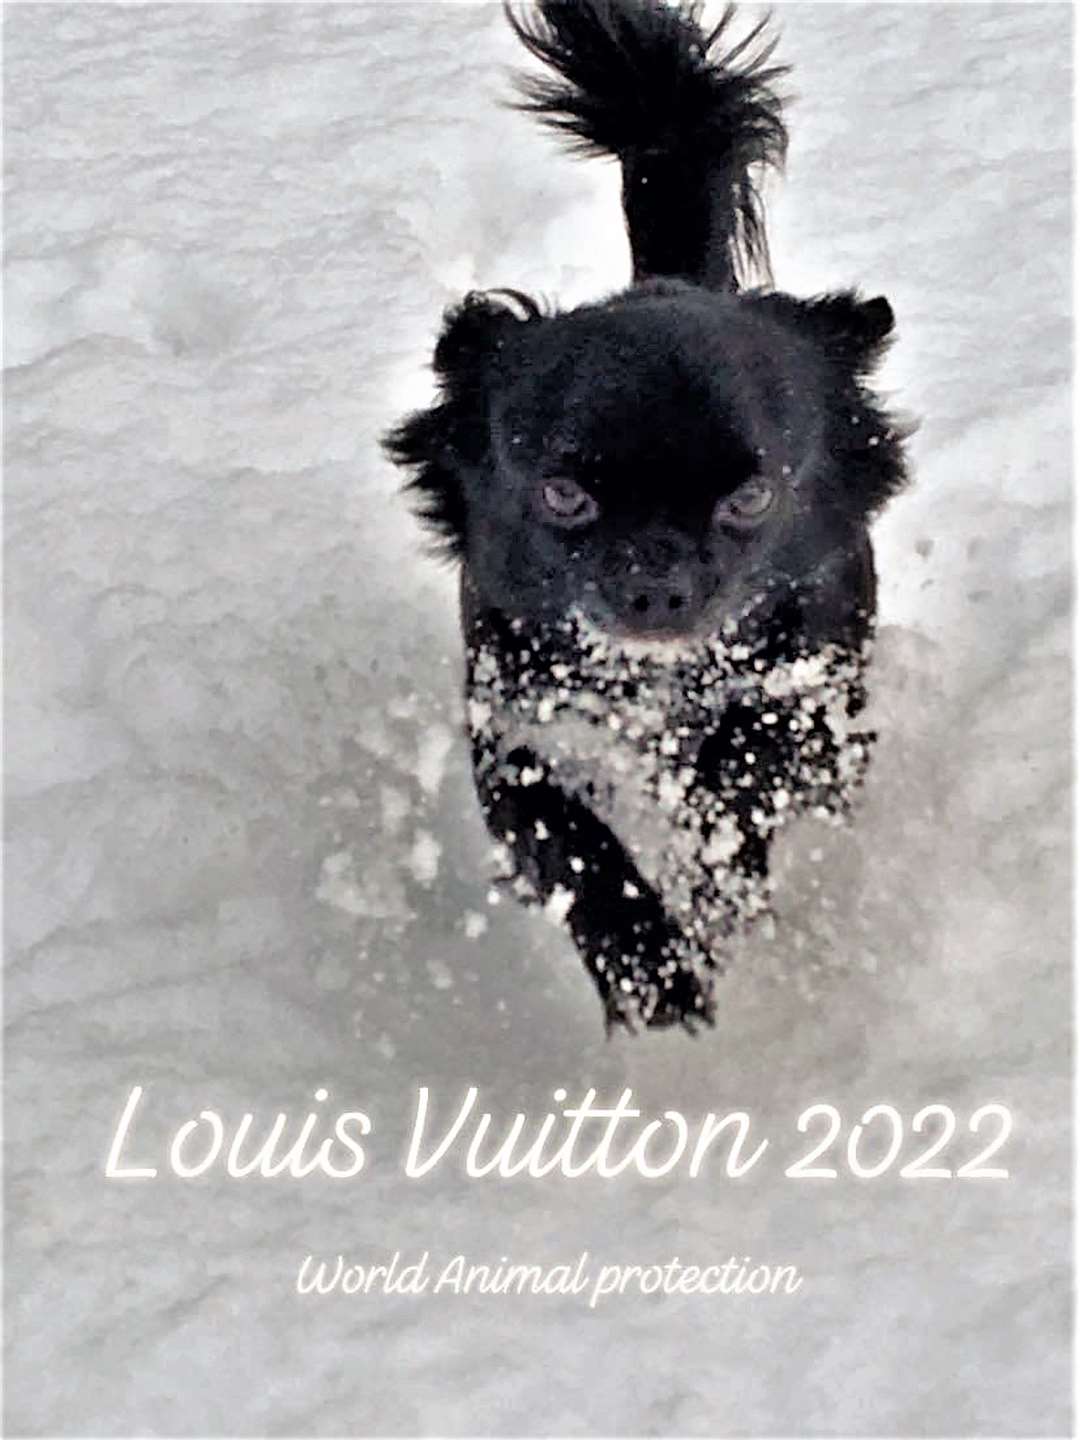 Louis Vuitton calendar for 2022 with money raised for an animal charity.